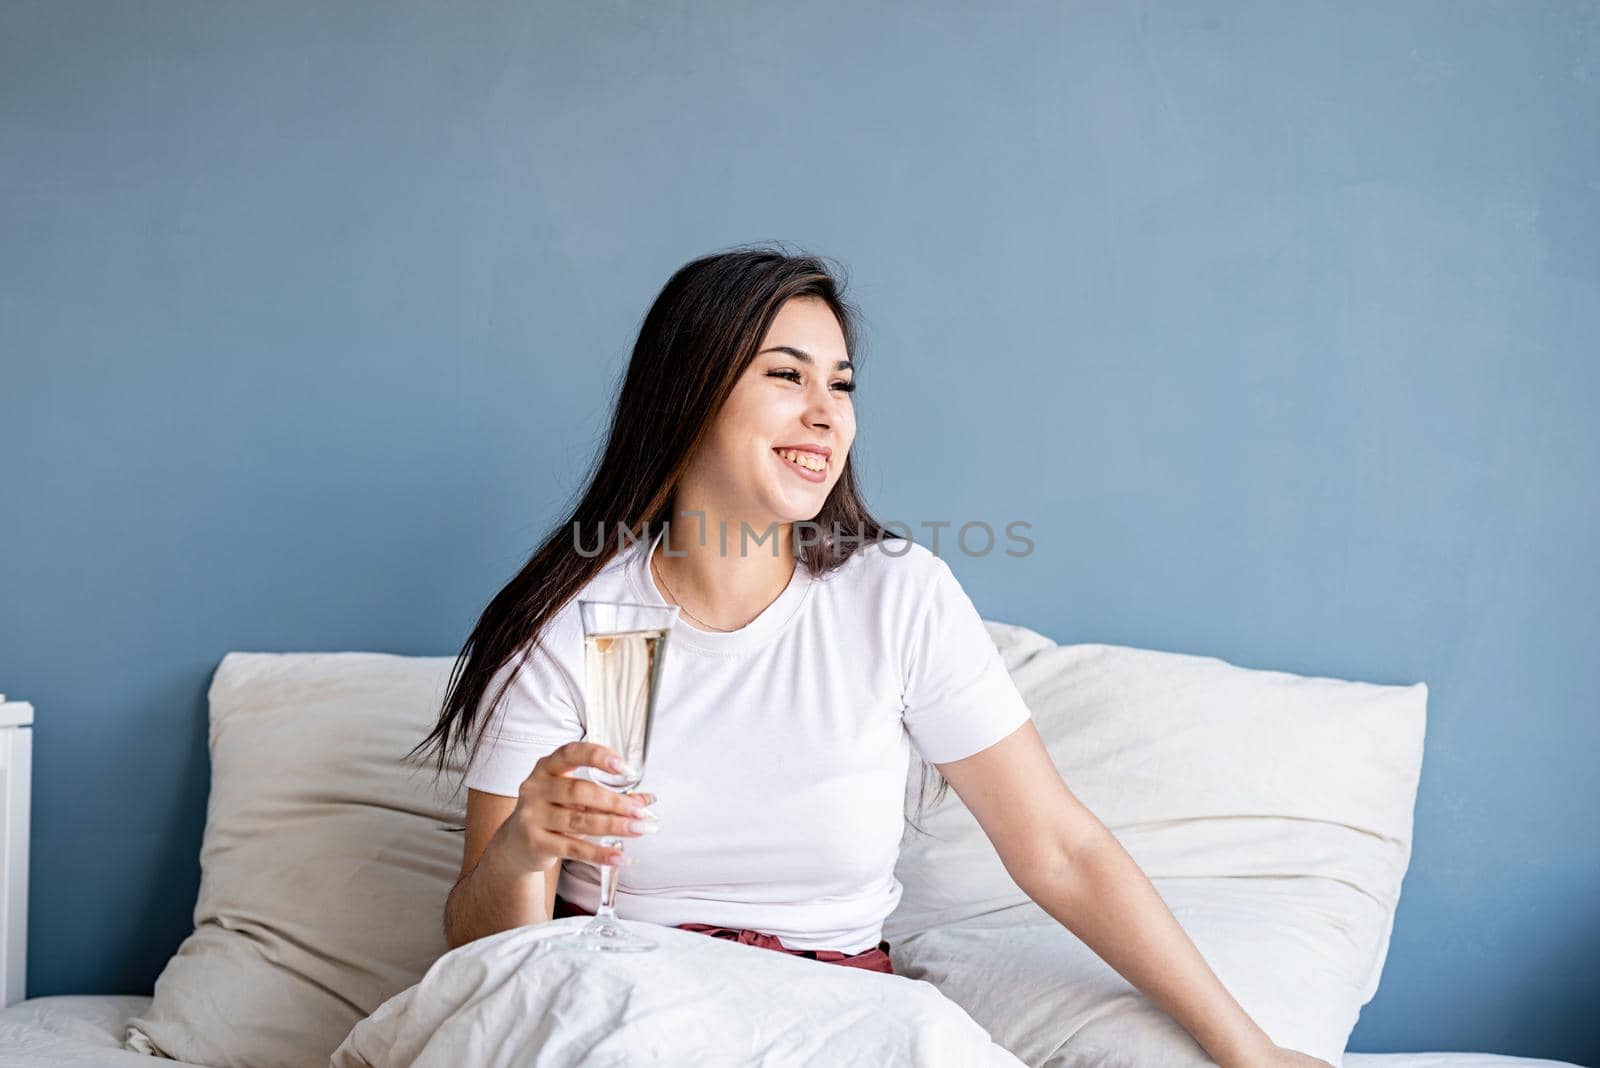 Valentines Day. Young brunette woman sitting awake in the bed drinking champagne